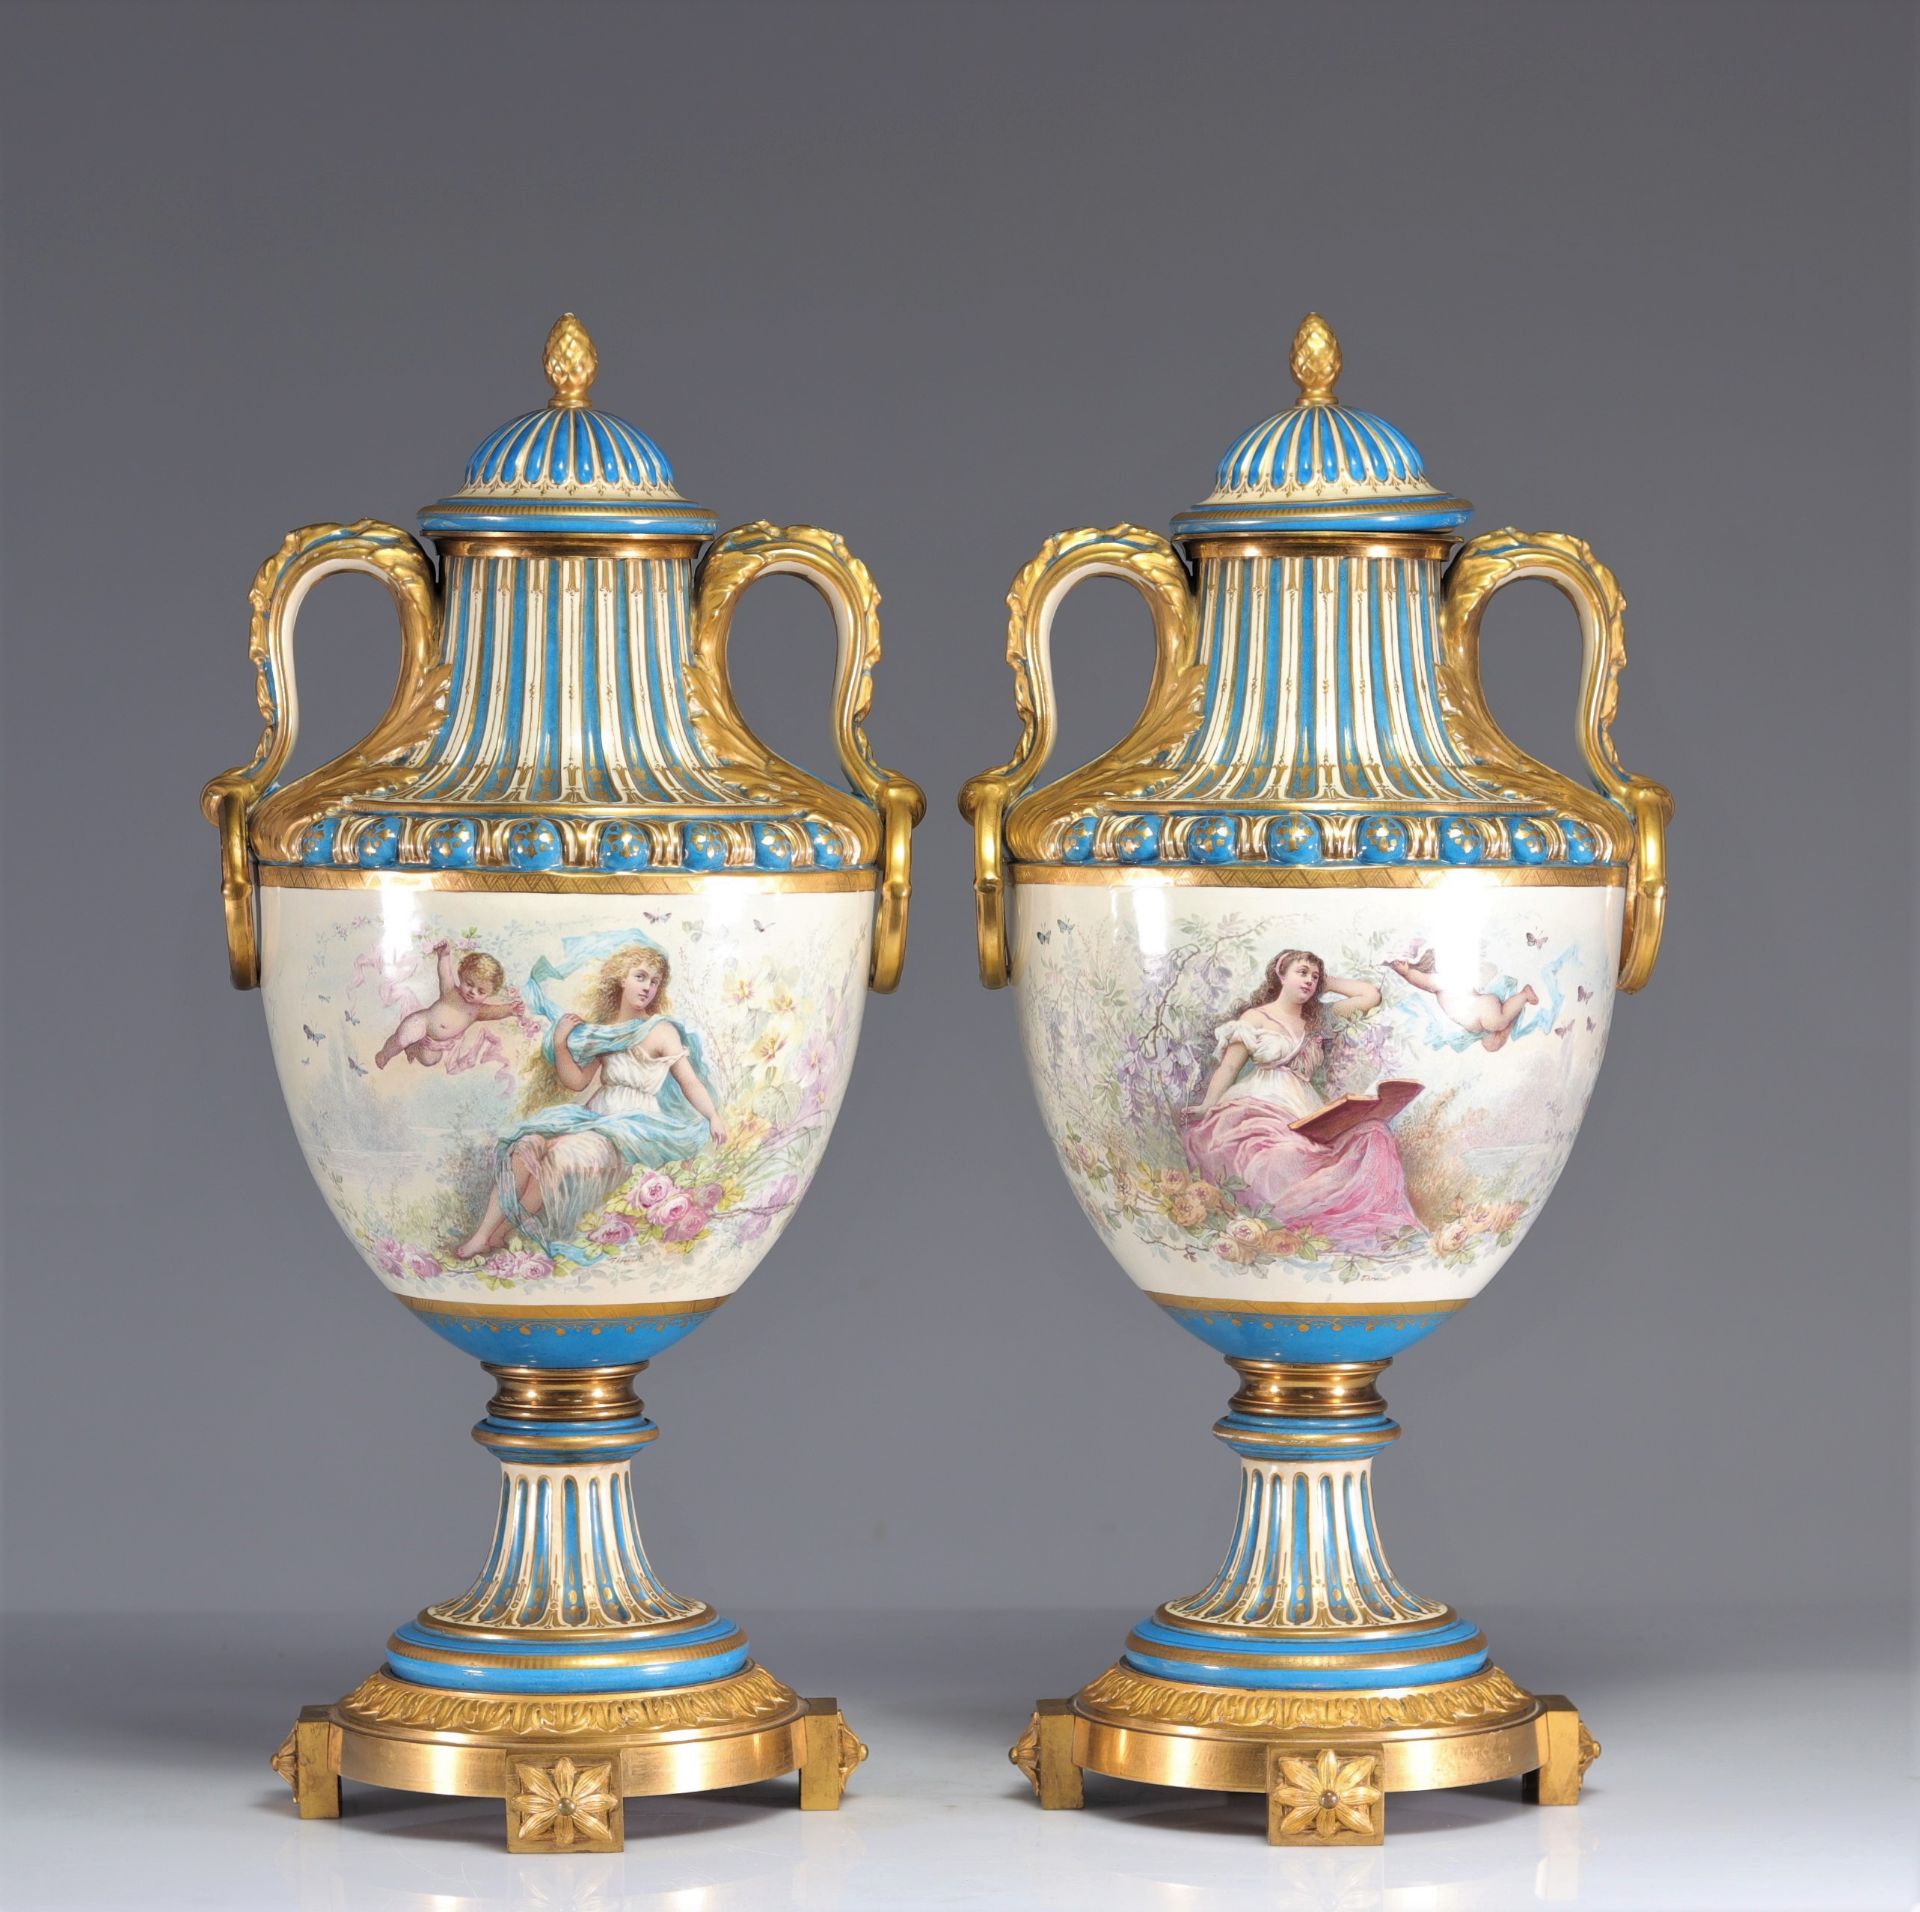 Sevres imposing pair of vases decorated with romantic scenes and cupids in gilded bronze